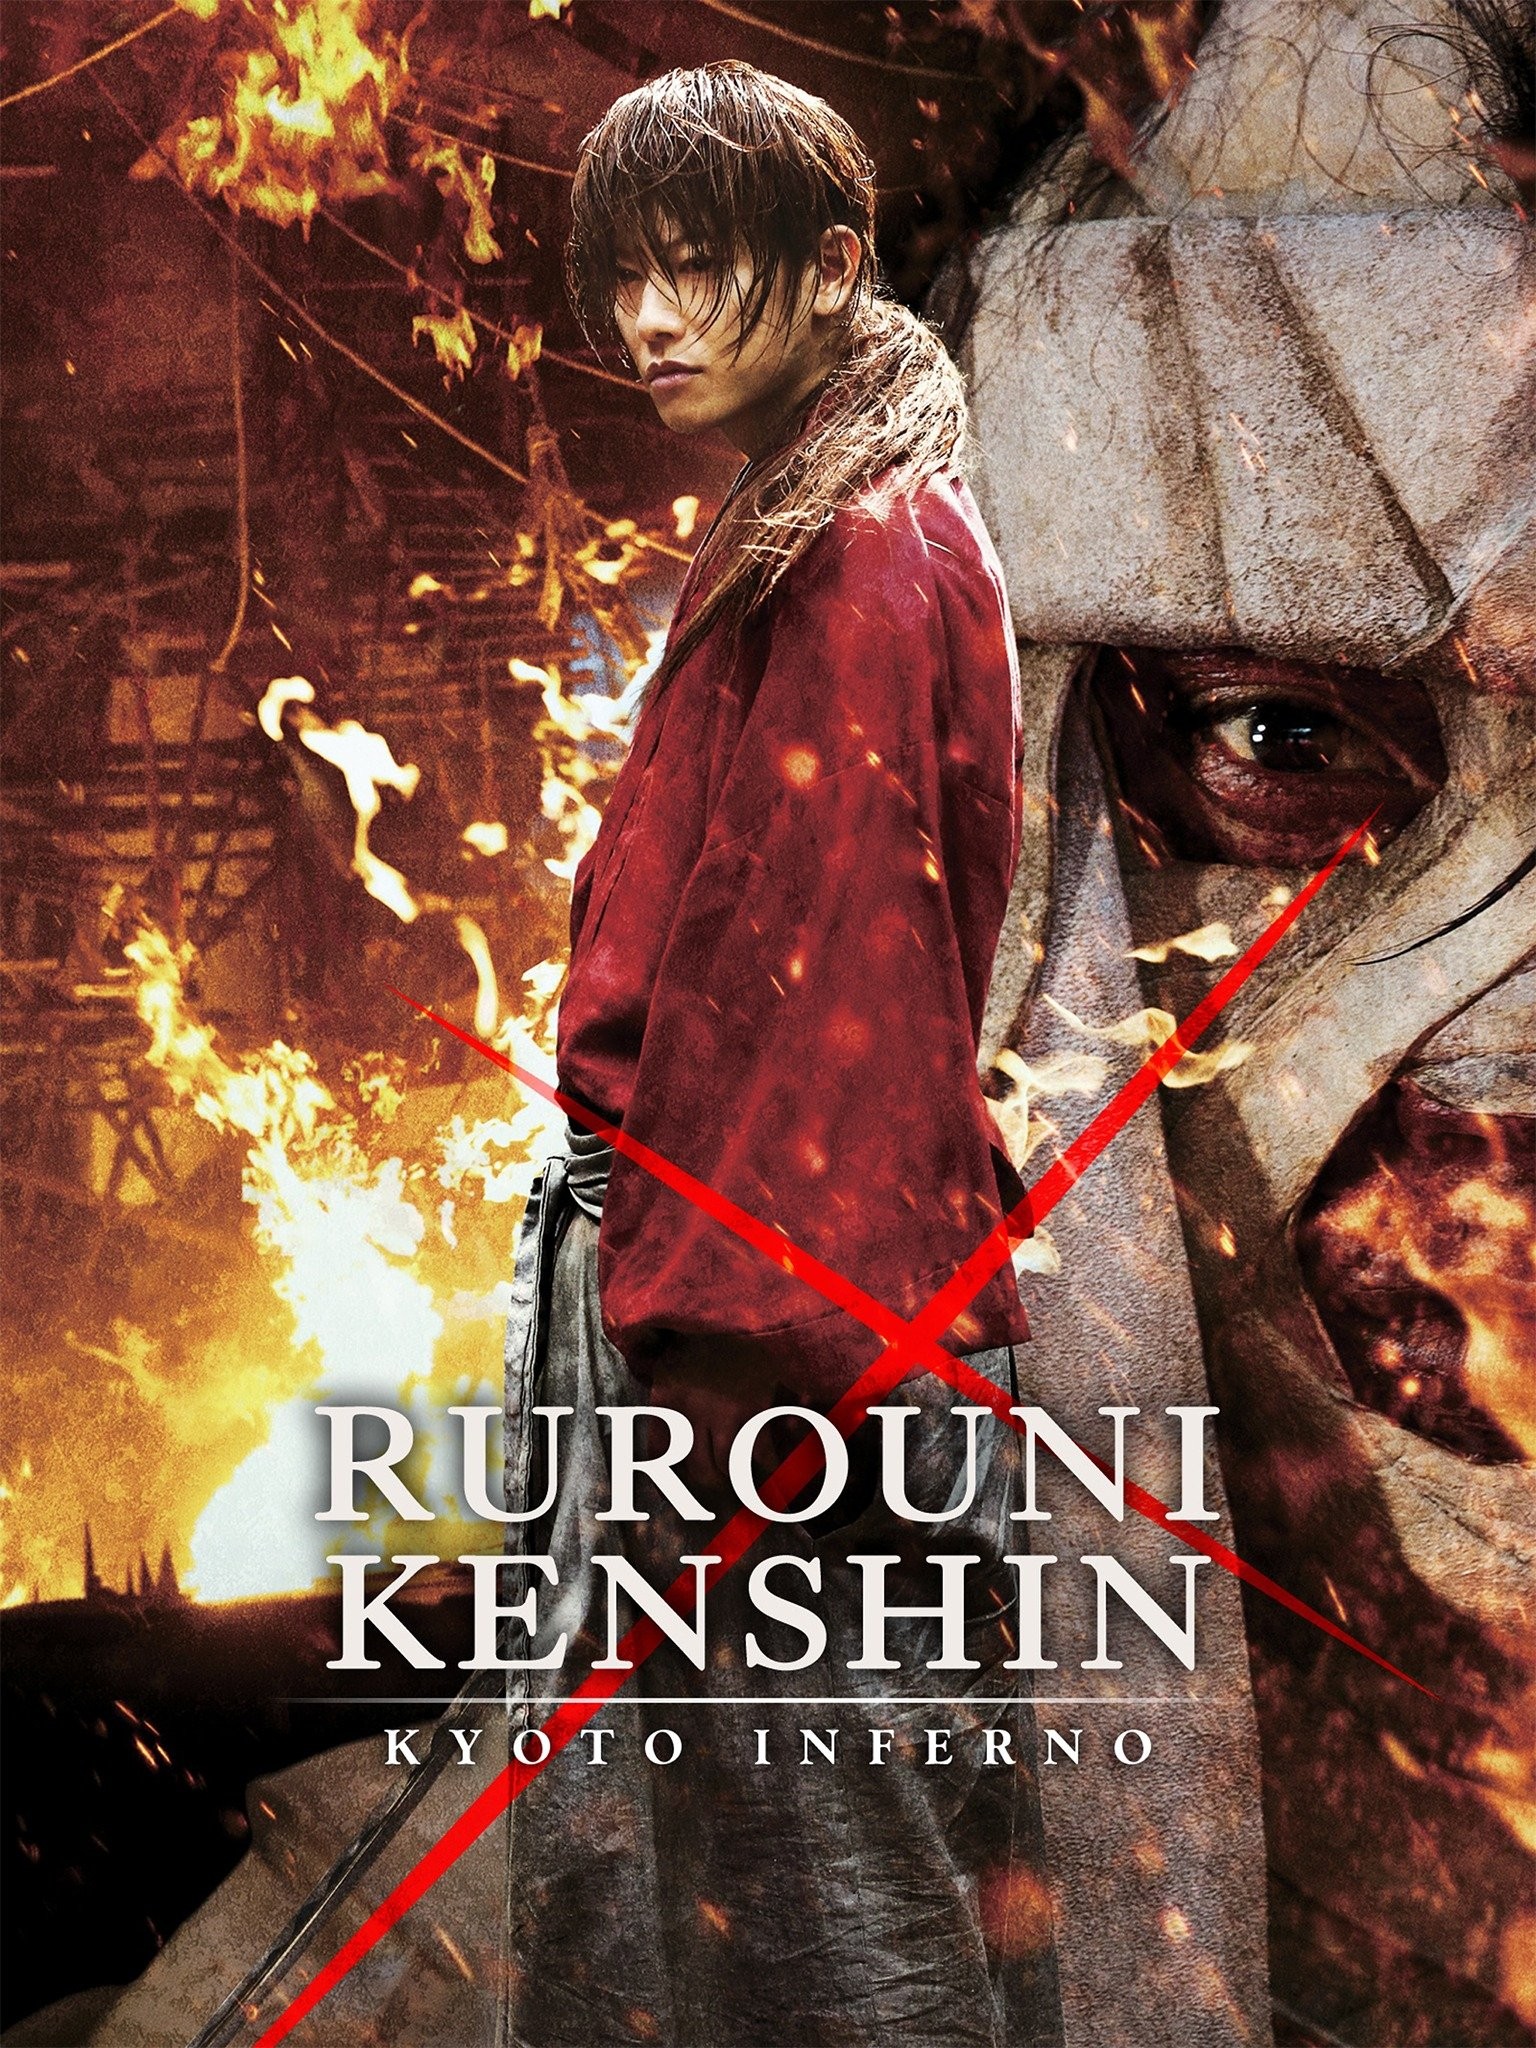 How To Watch All 'Rurouni Kenshin' Movies in Order